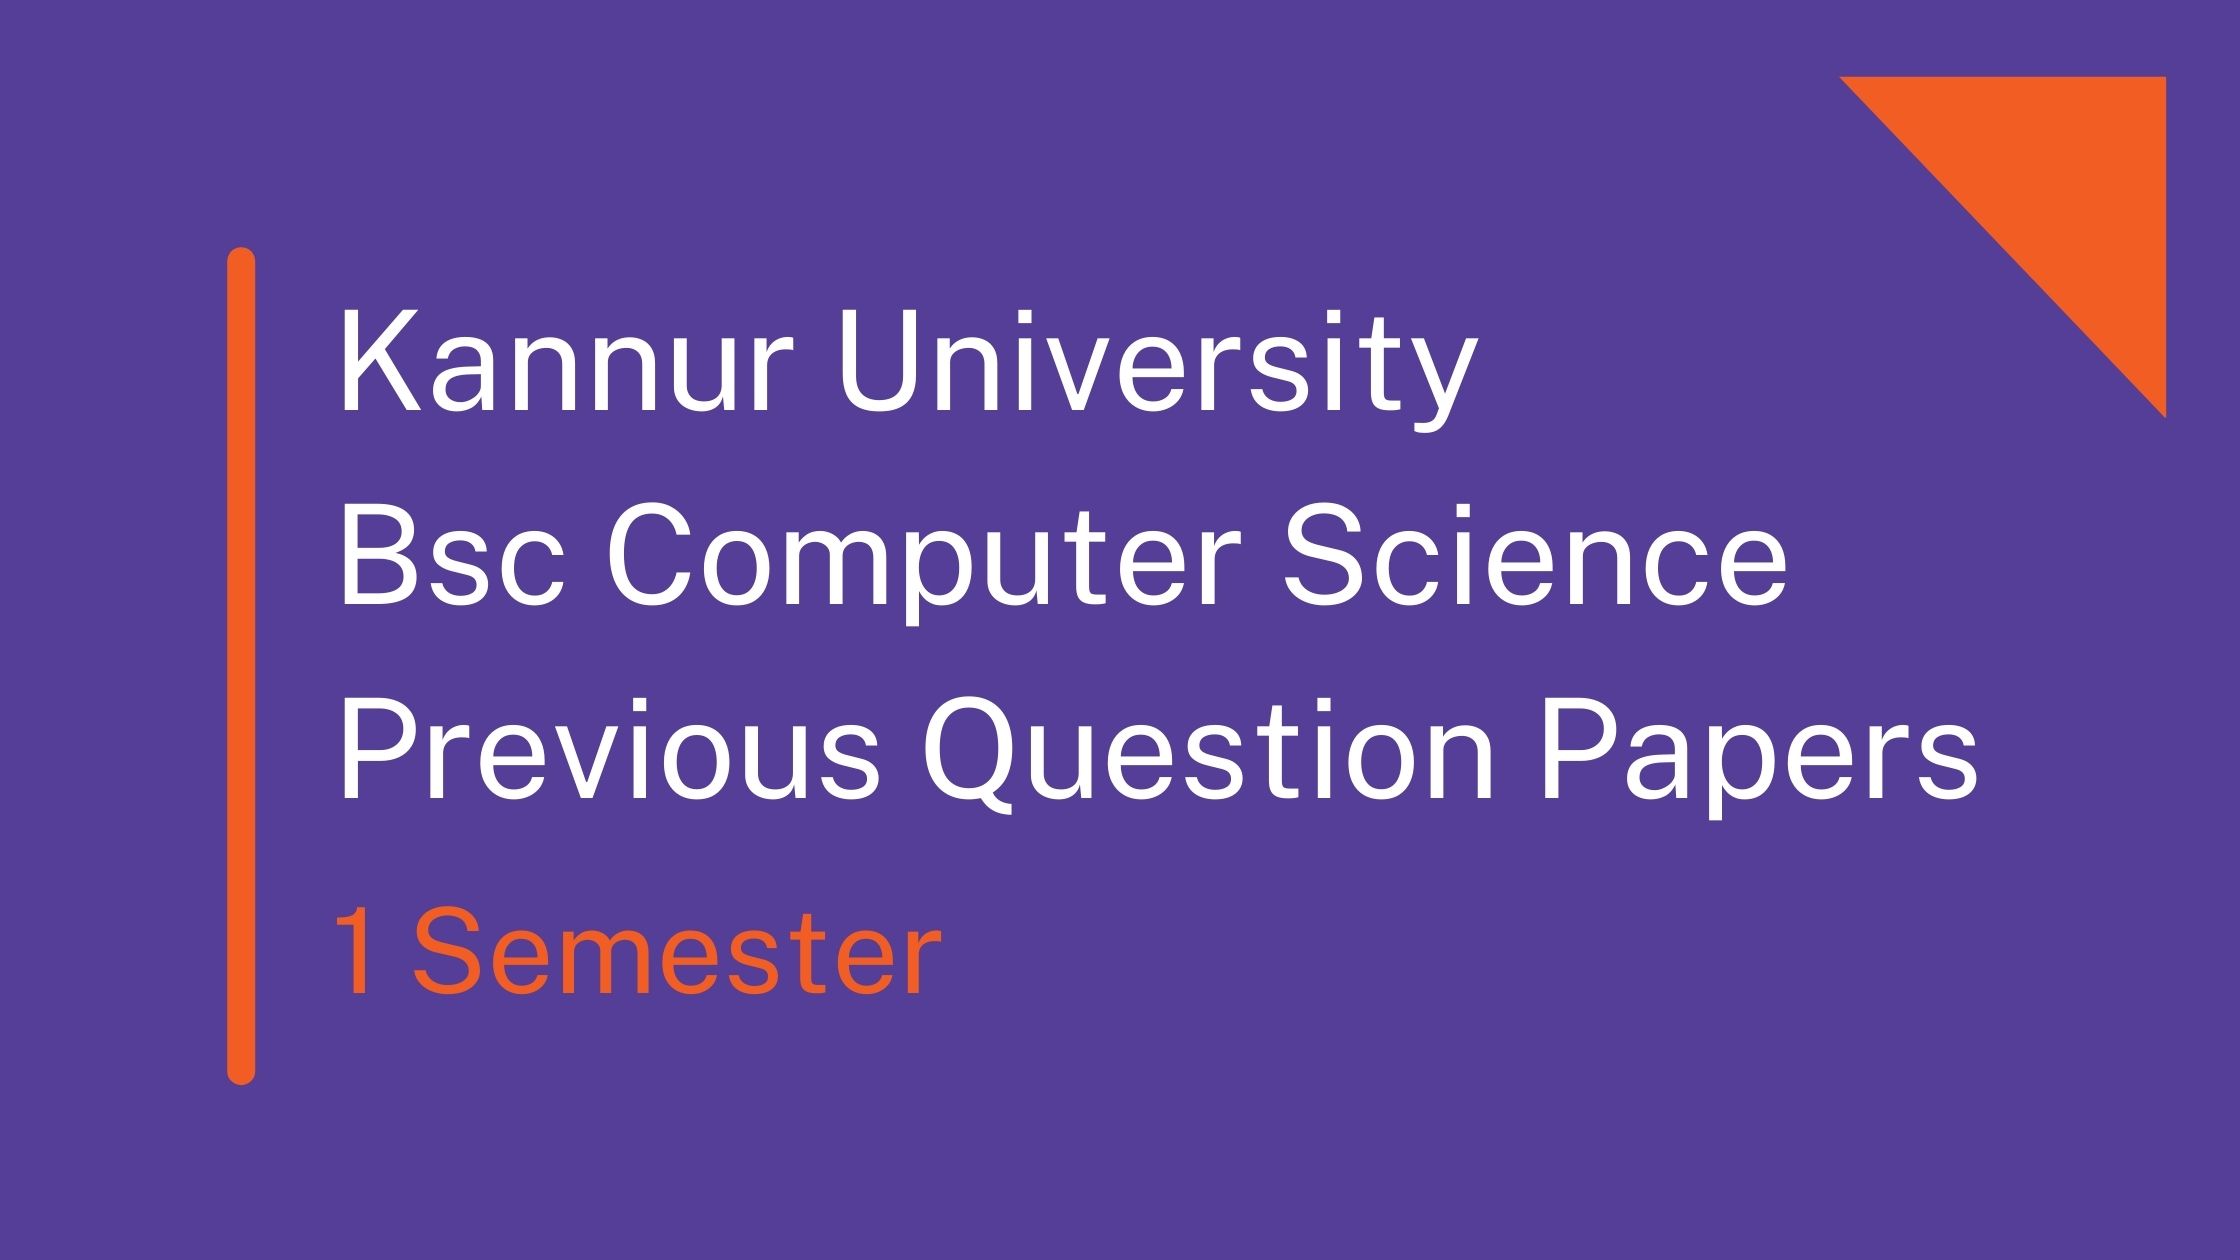 bsc computer science question papers kannur university